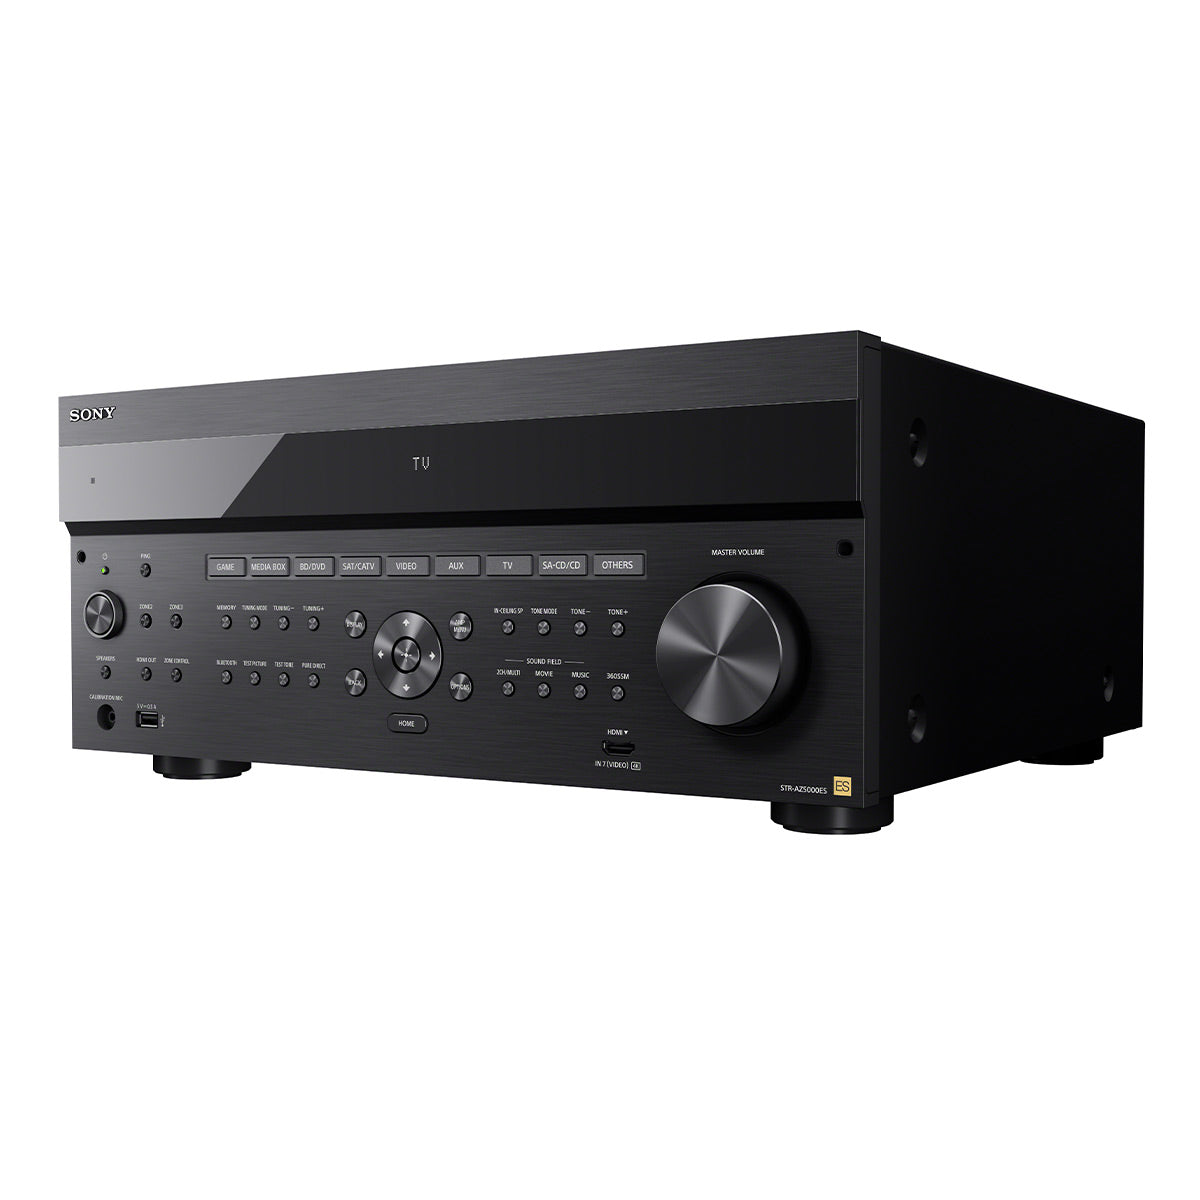 Sony STR-AZ5000ES 11.2 Channel 8K Home Theater AV Receiver with Dolby Atmos, DTS: X, IMAX Enhanced, Google Assistant, & Works with Sonos